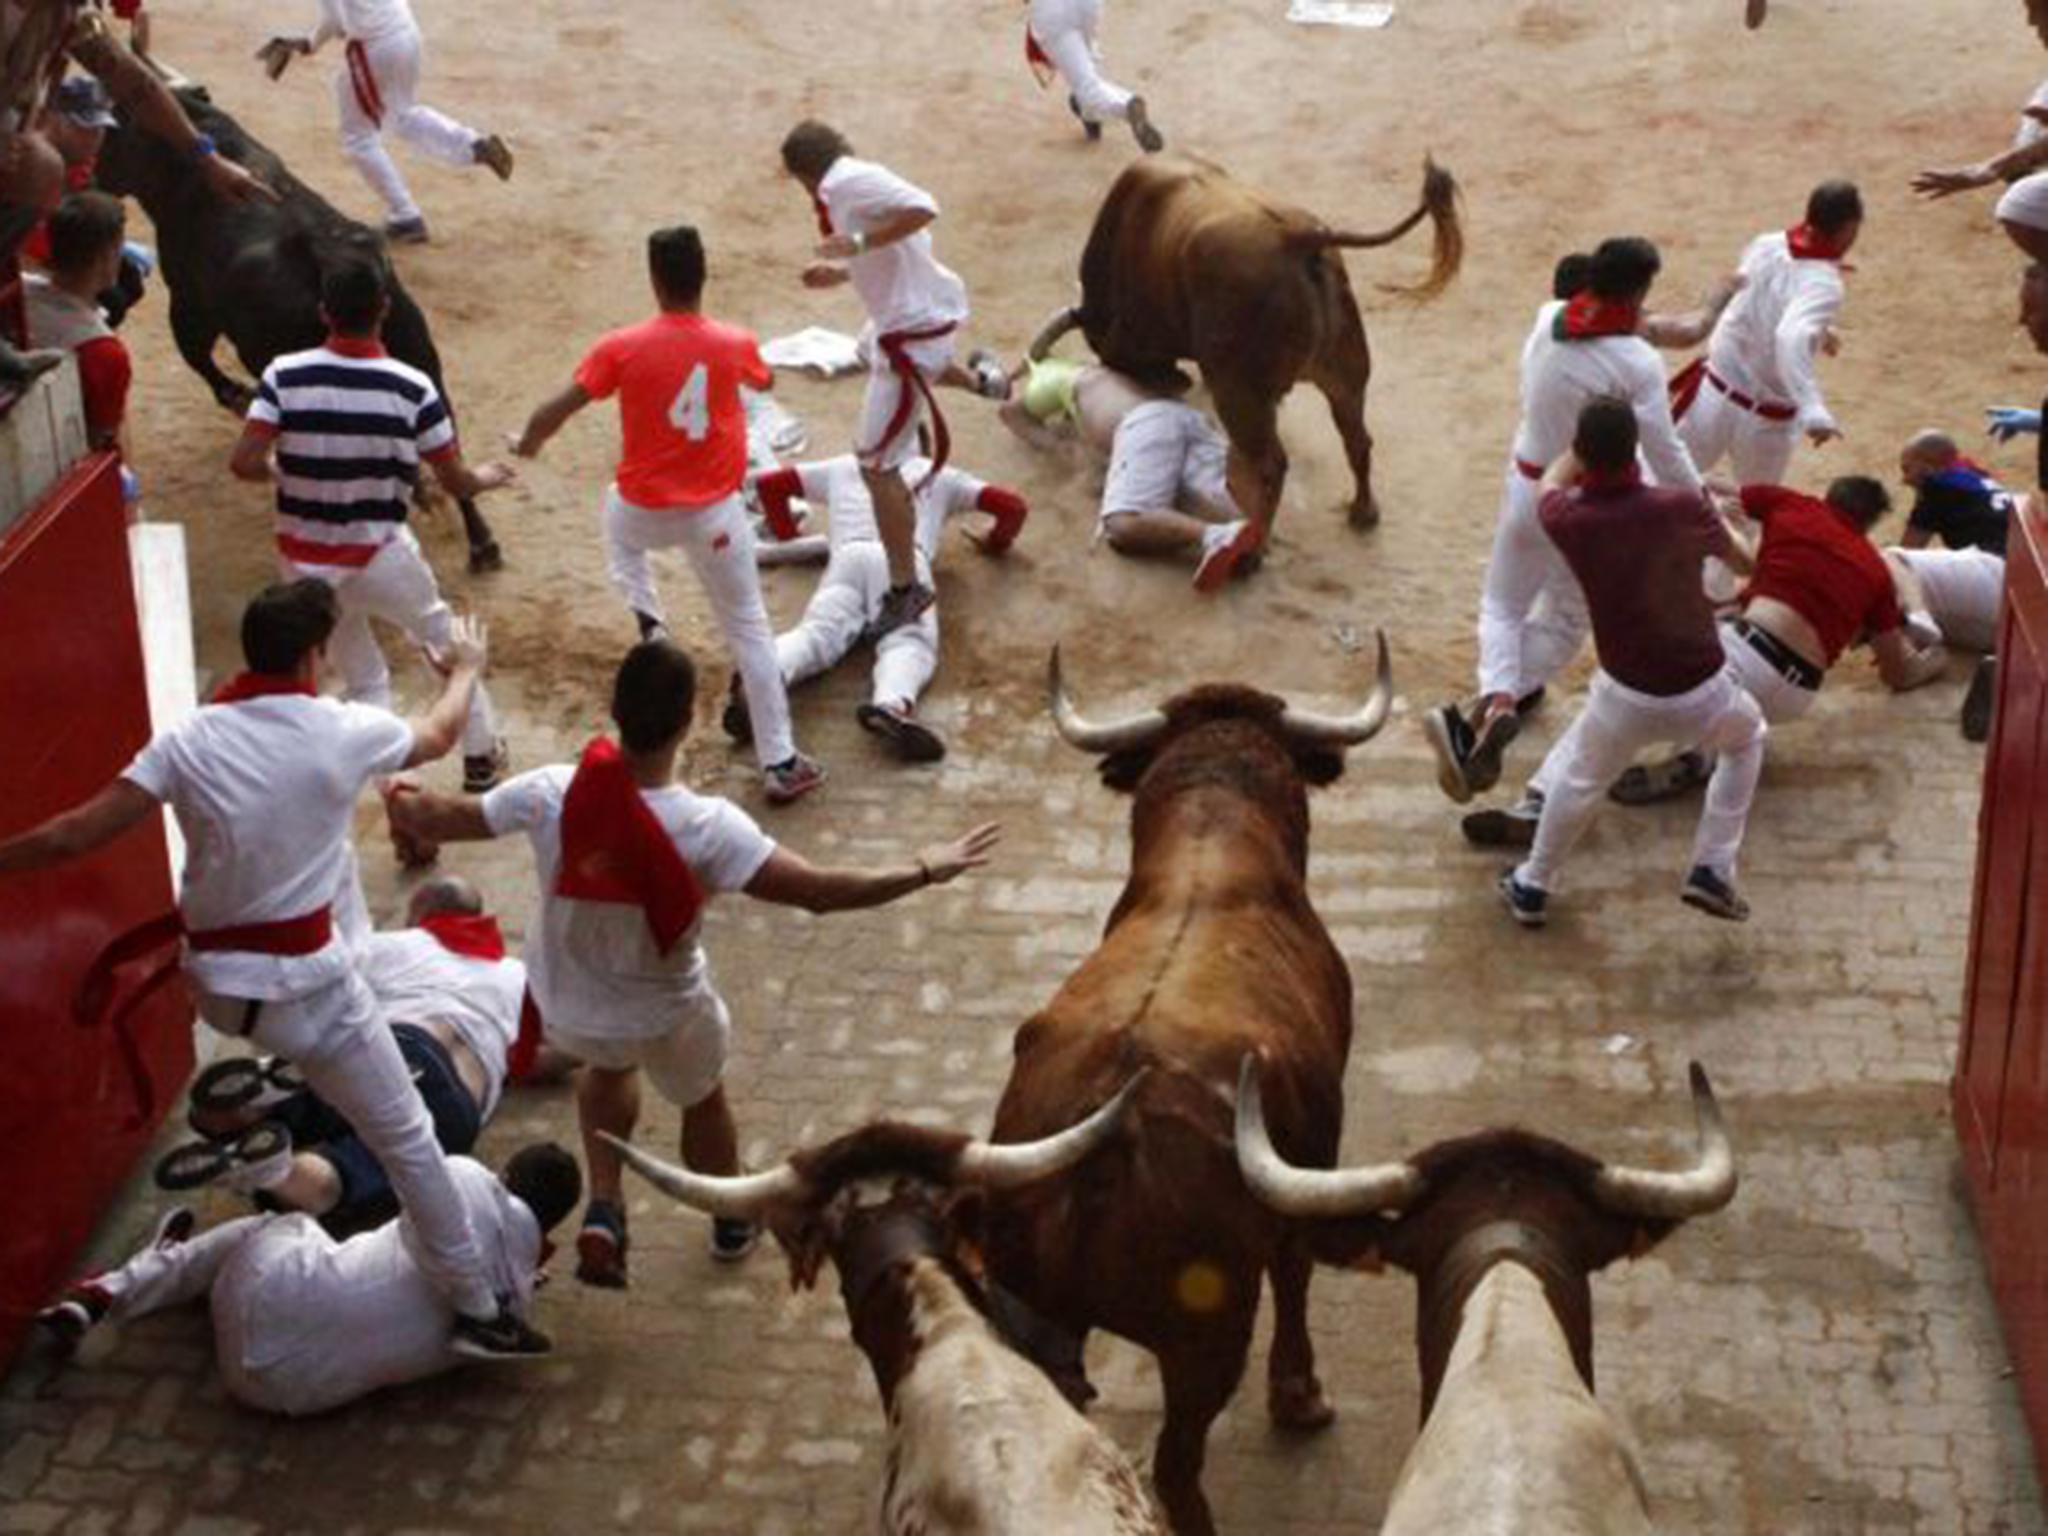 Bulls chase runners during the annual Pamplona festival in 2016